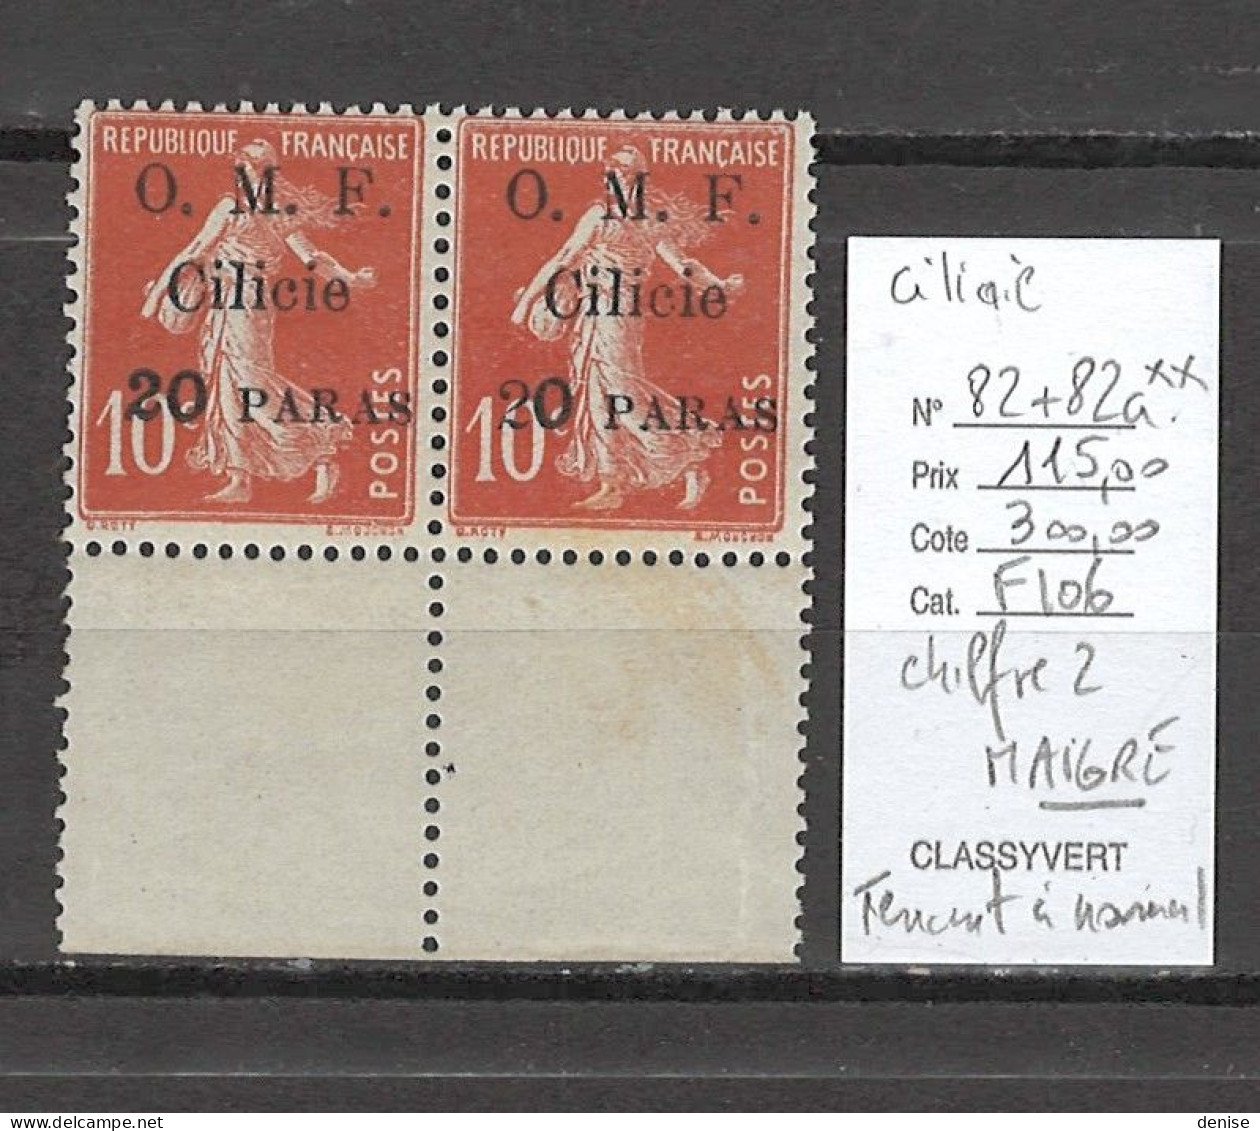 Cilicie - Yvert 82a** - VARIETE CHIFFRE 2 MAIGRE - Semeuse 10 Cts Rouge - Neufs